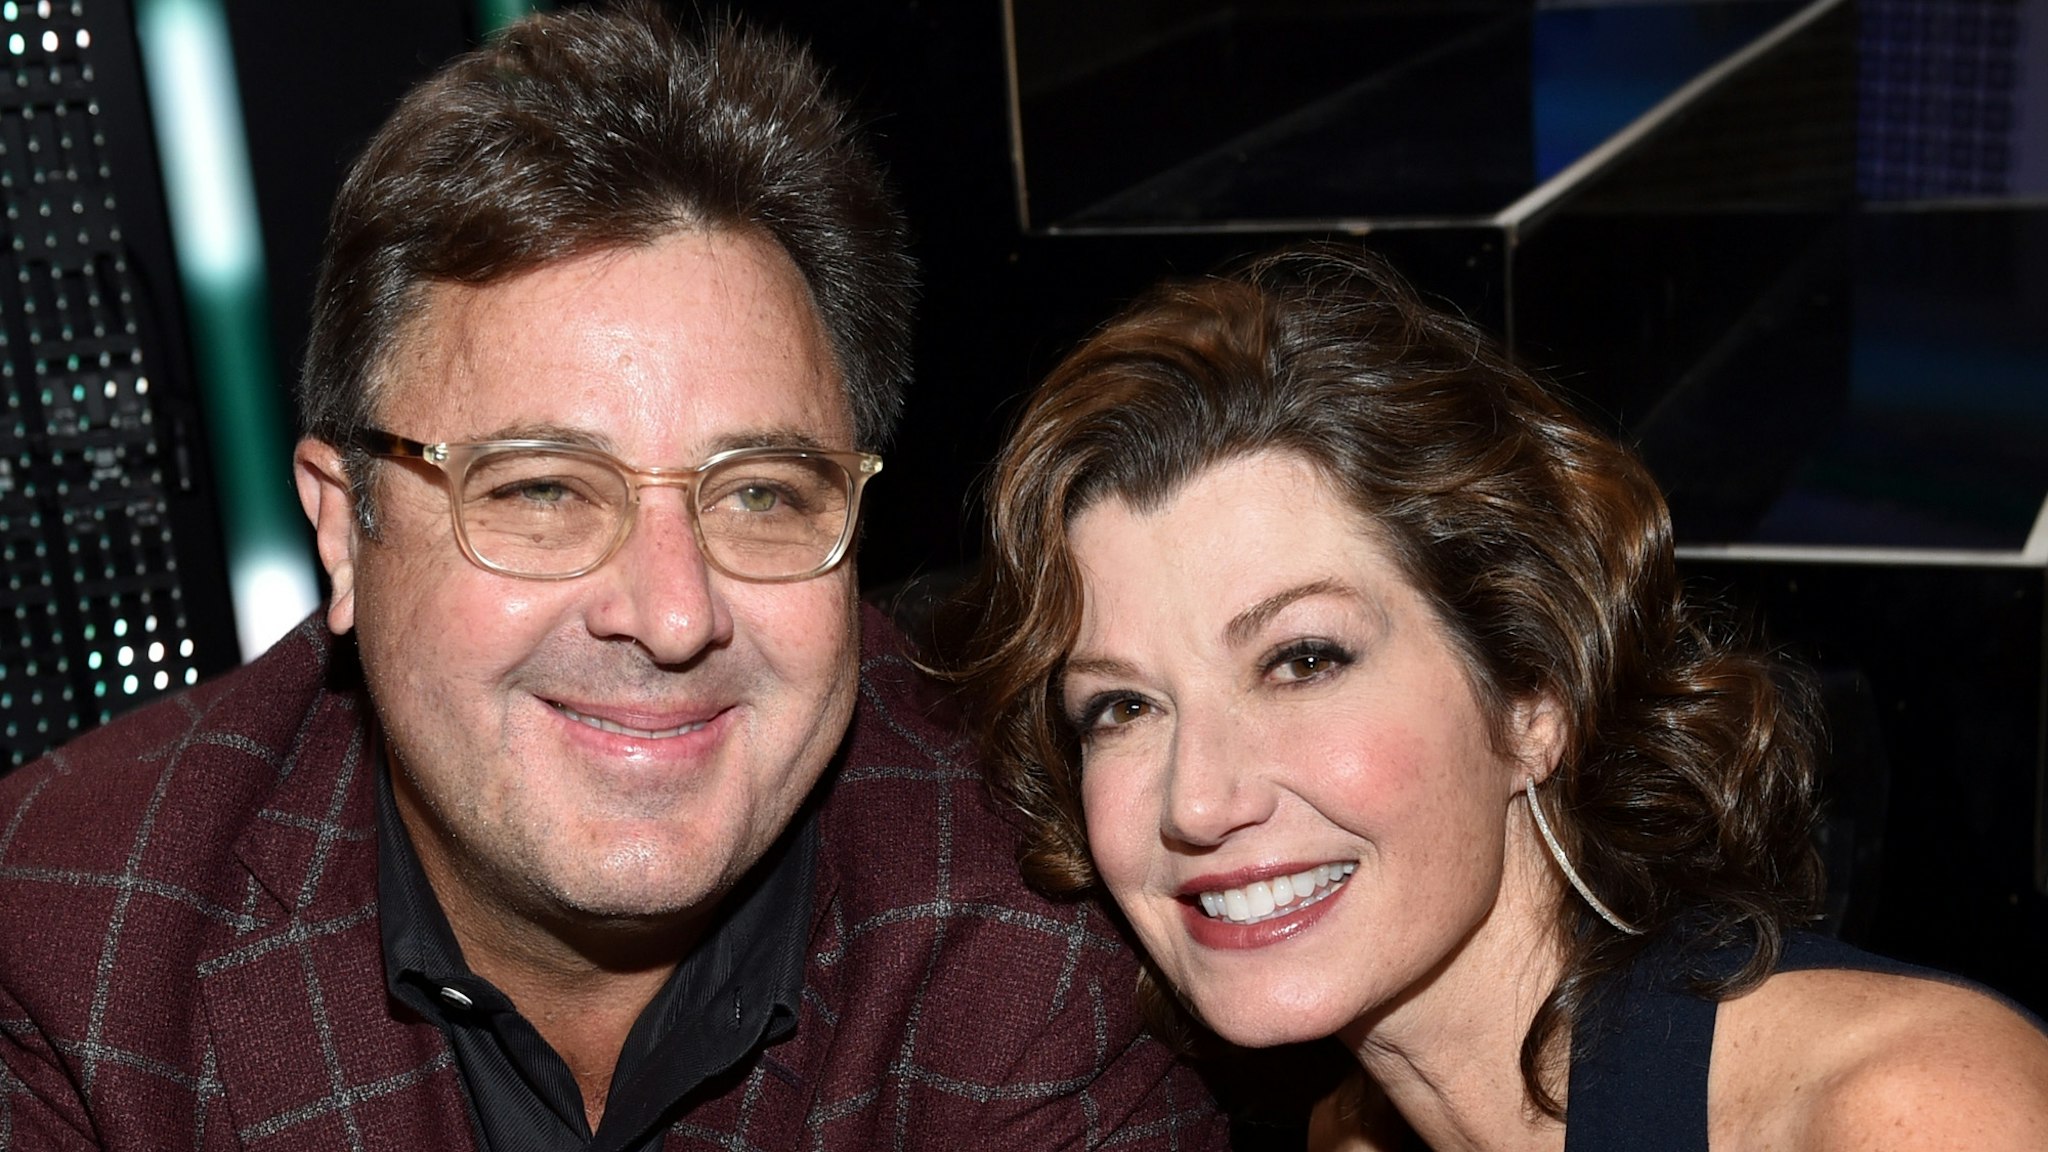 Singer-songwriters Vince Gill and Amy Grant attend the 2017 CMT Artists Of The Year on October 18, 2017 in Nashville, Tennessee.